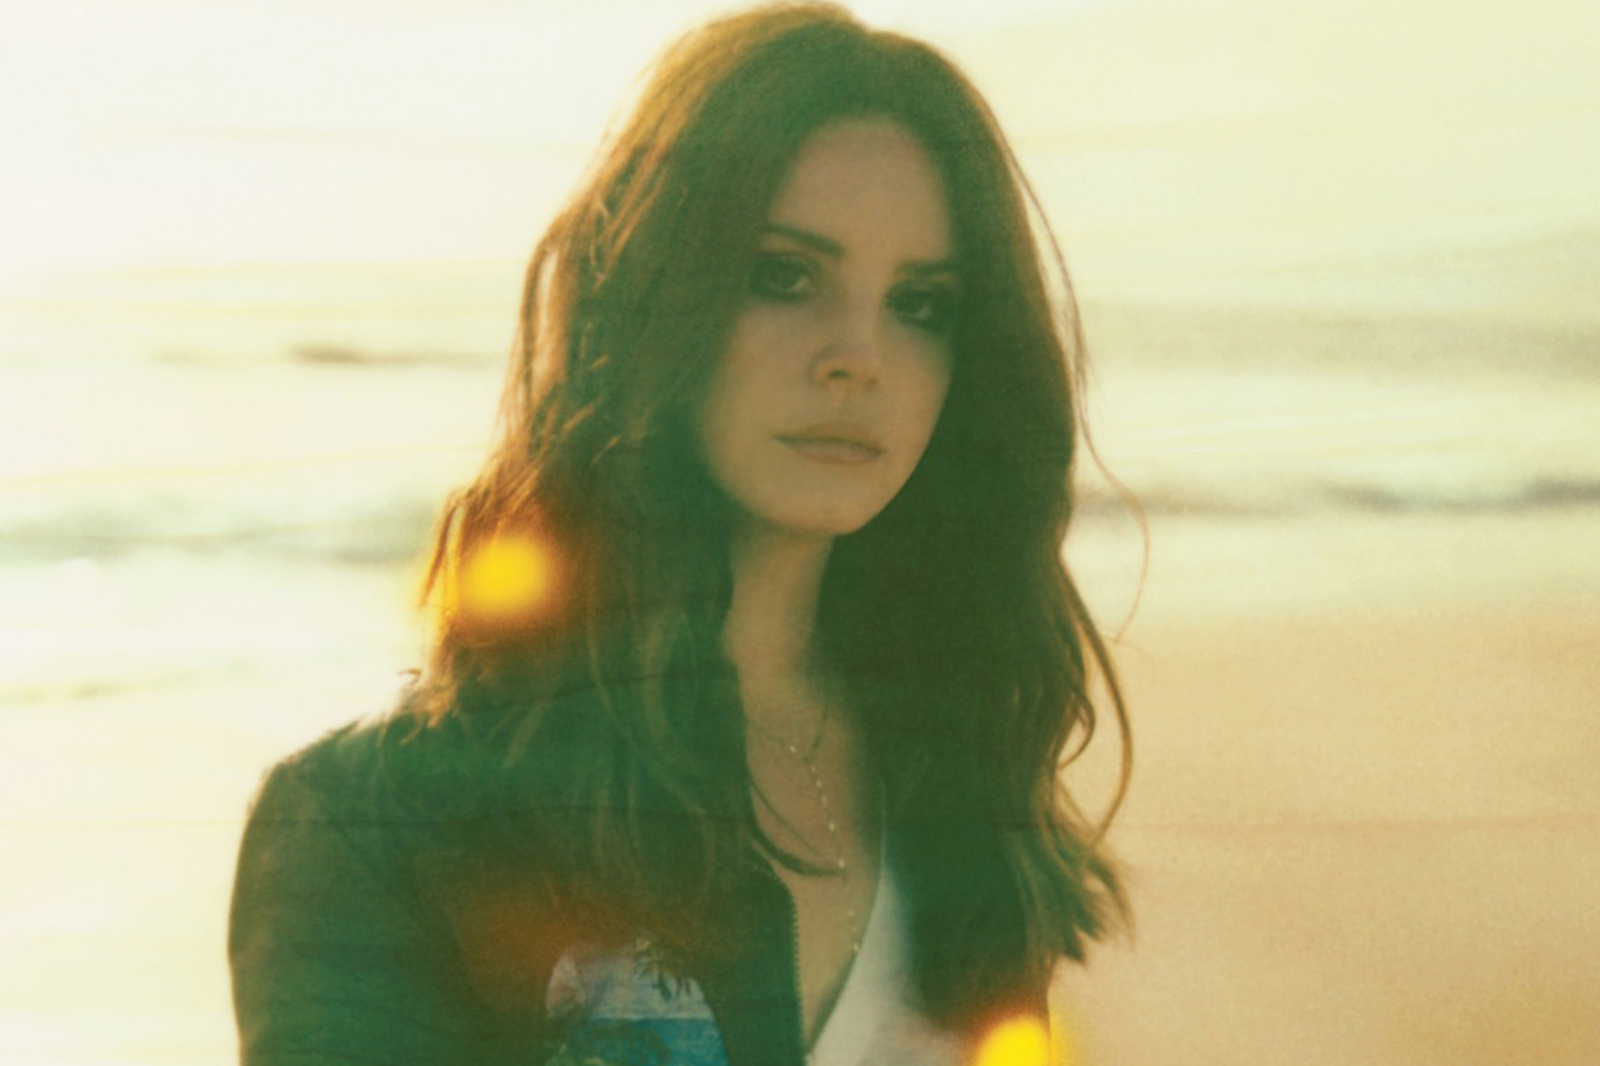 Lana Del Rey shares 'Shades of Cool' video